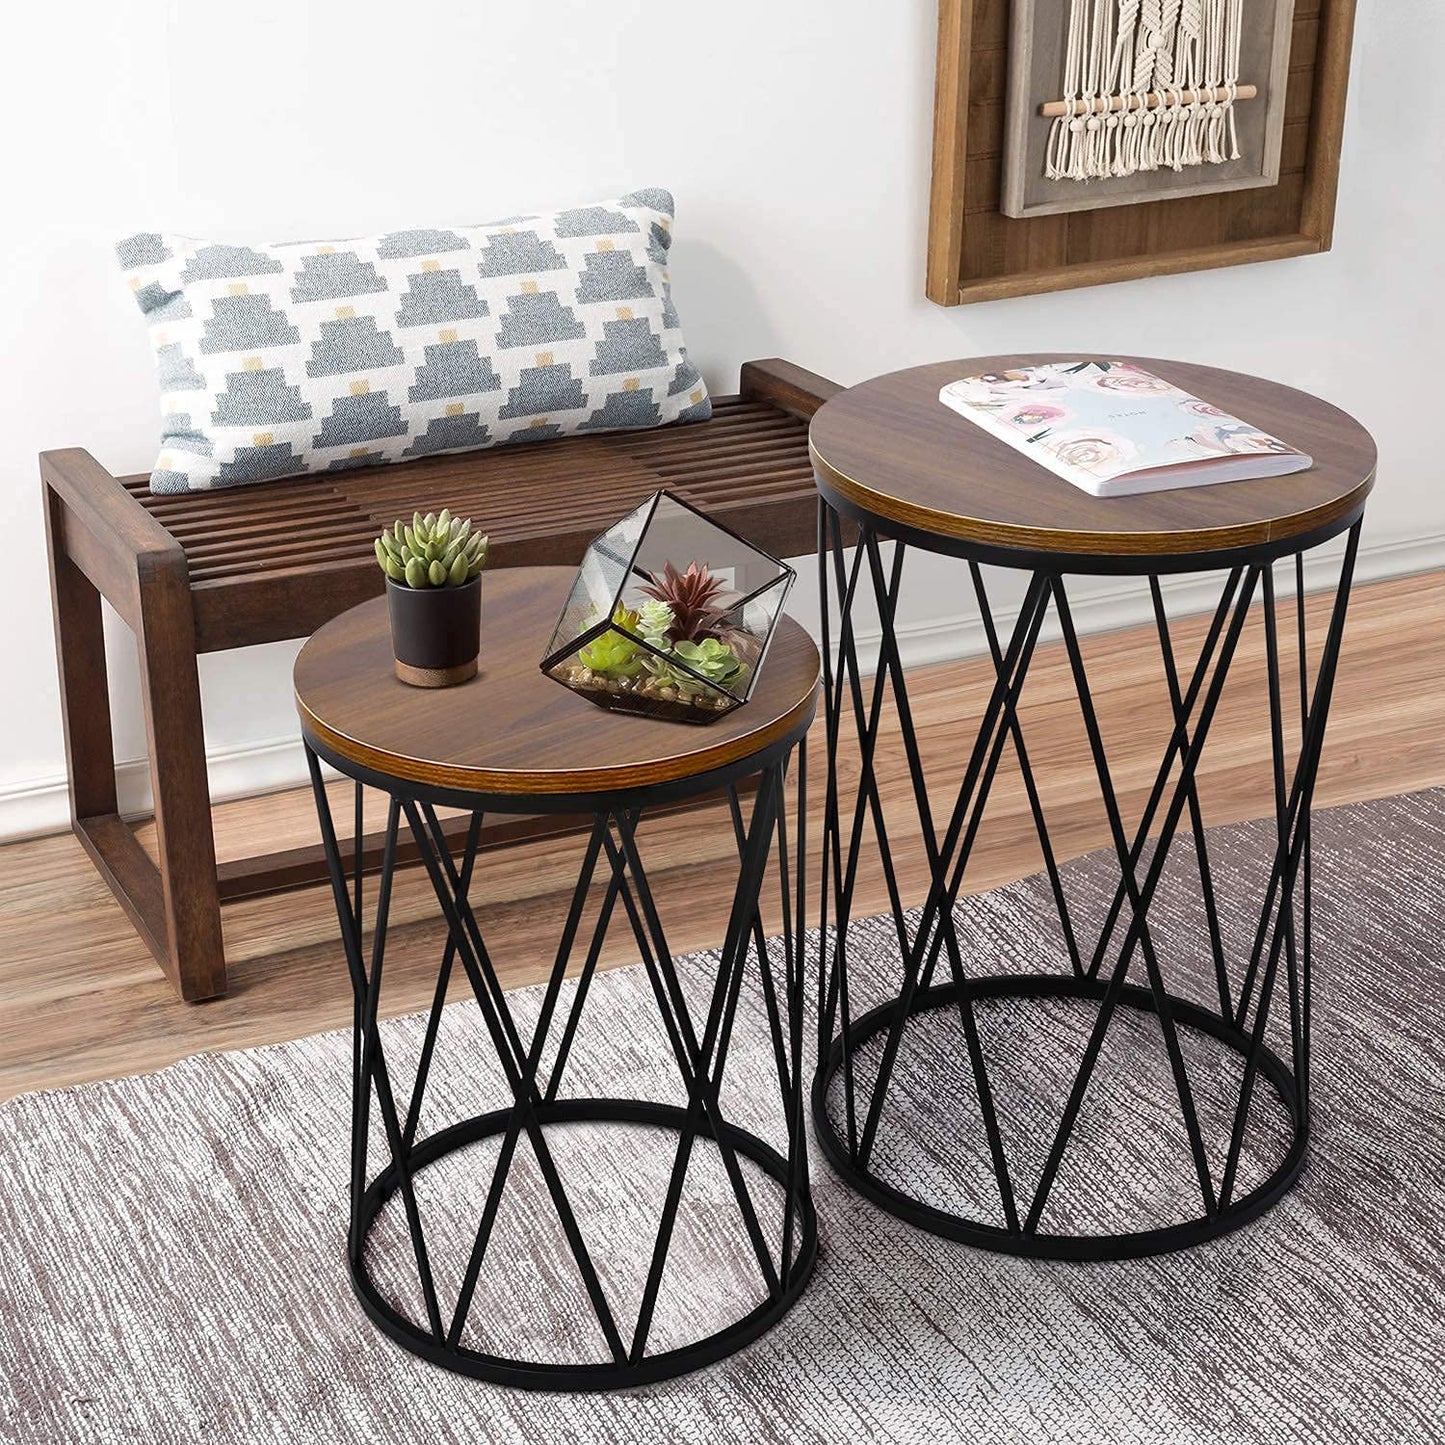 Nest Of Tables: Set of 2 Industrial Nesting Coffee Tables with Wood and Metal Frame, Modern Nightstand for Living Room Bedroom Office, Easy to Storage